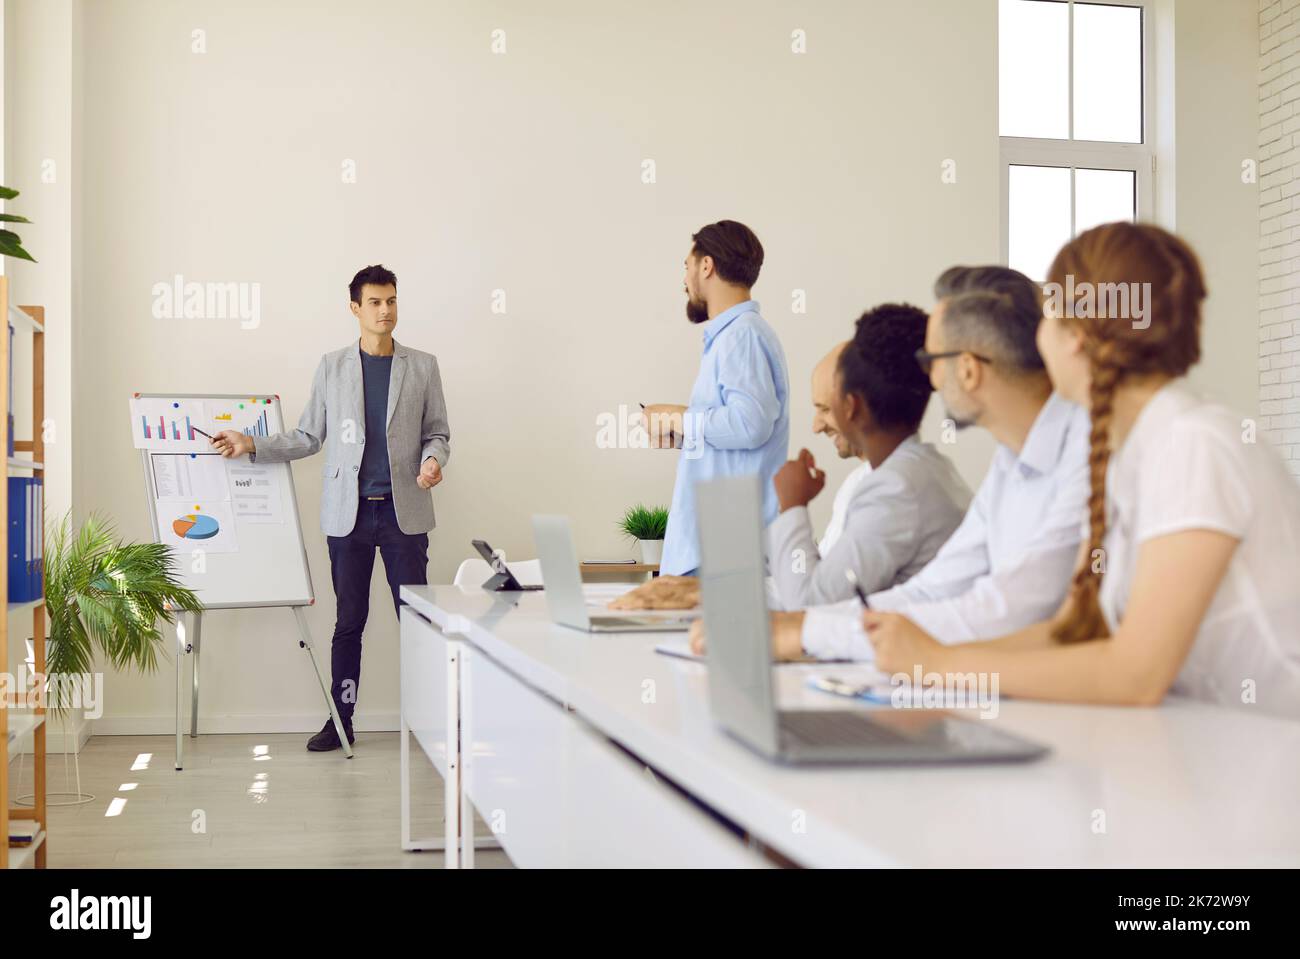 Young man making business presentation in front of office whiteboard during team meeting Stock Photo